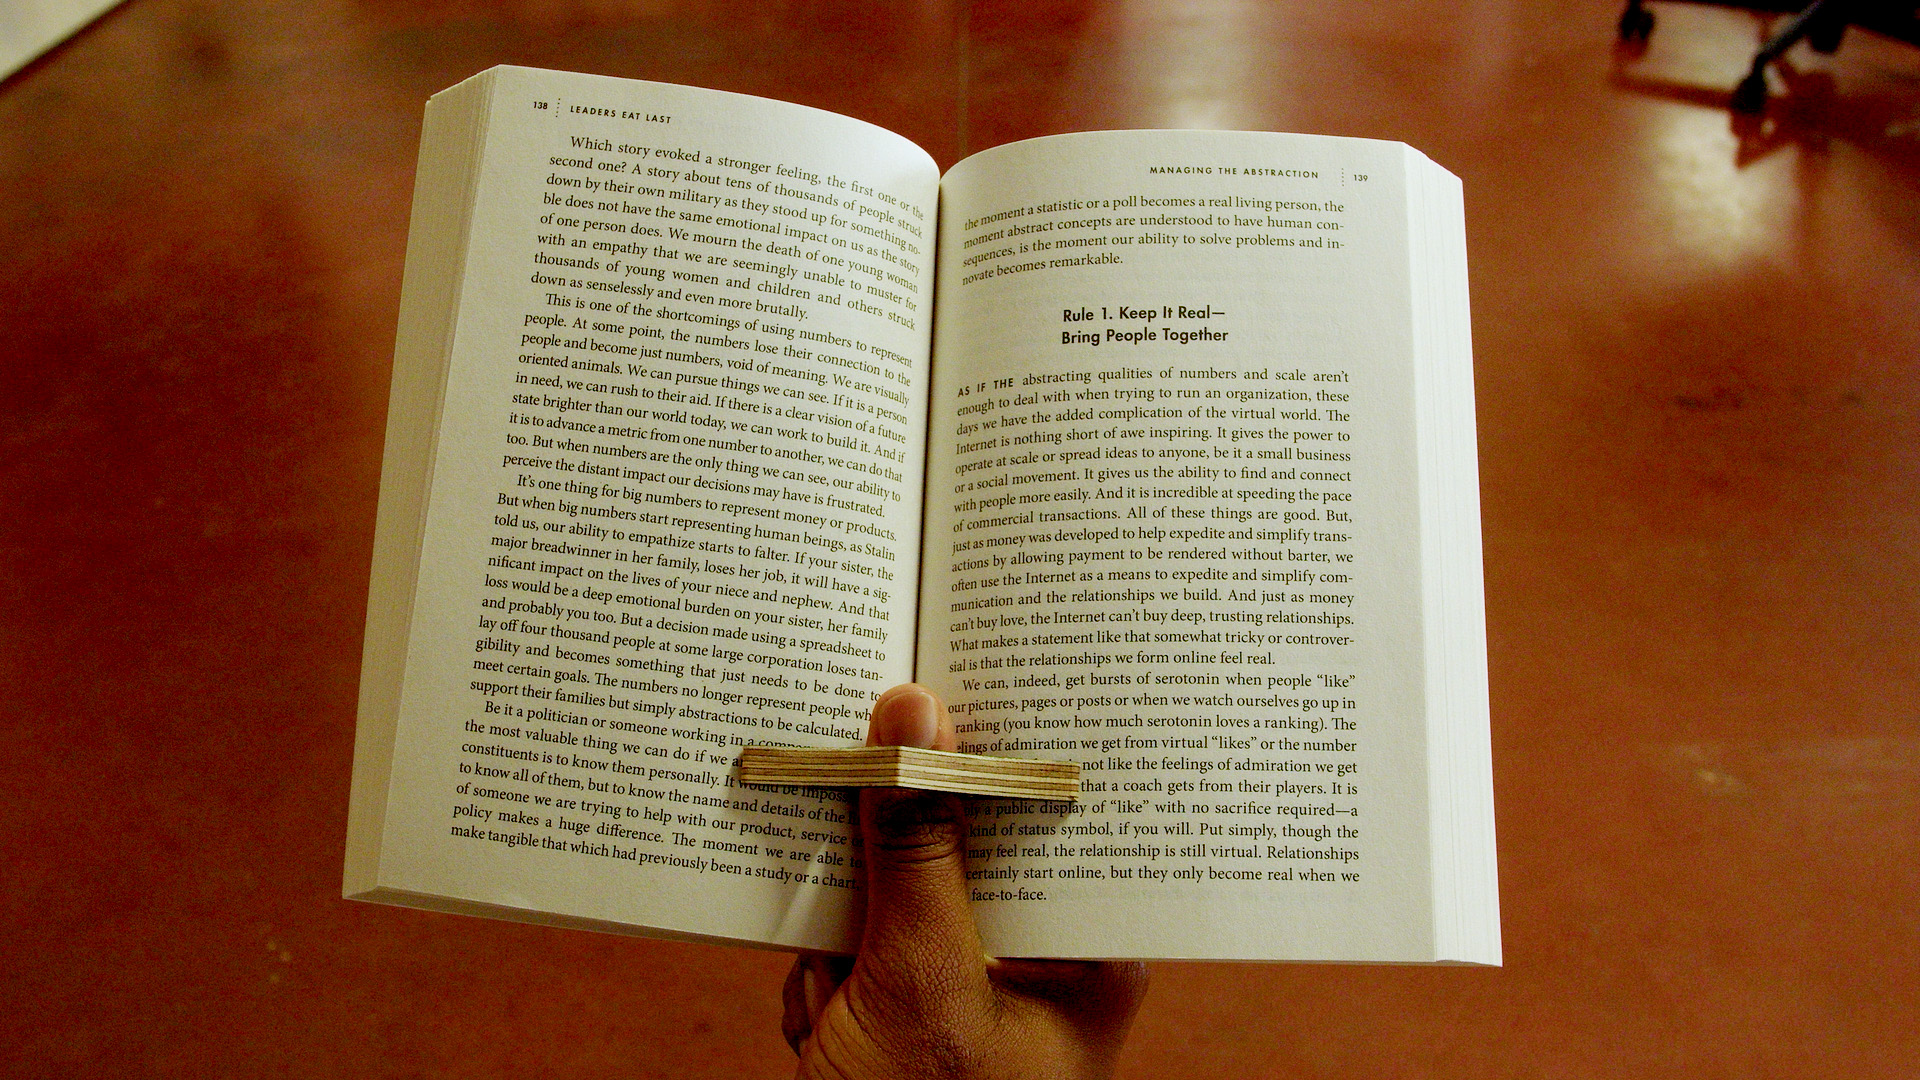 An example of the CNC milled page holder being used in a book